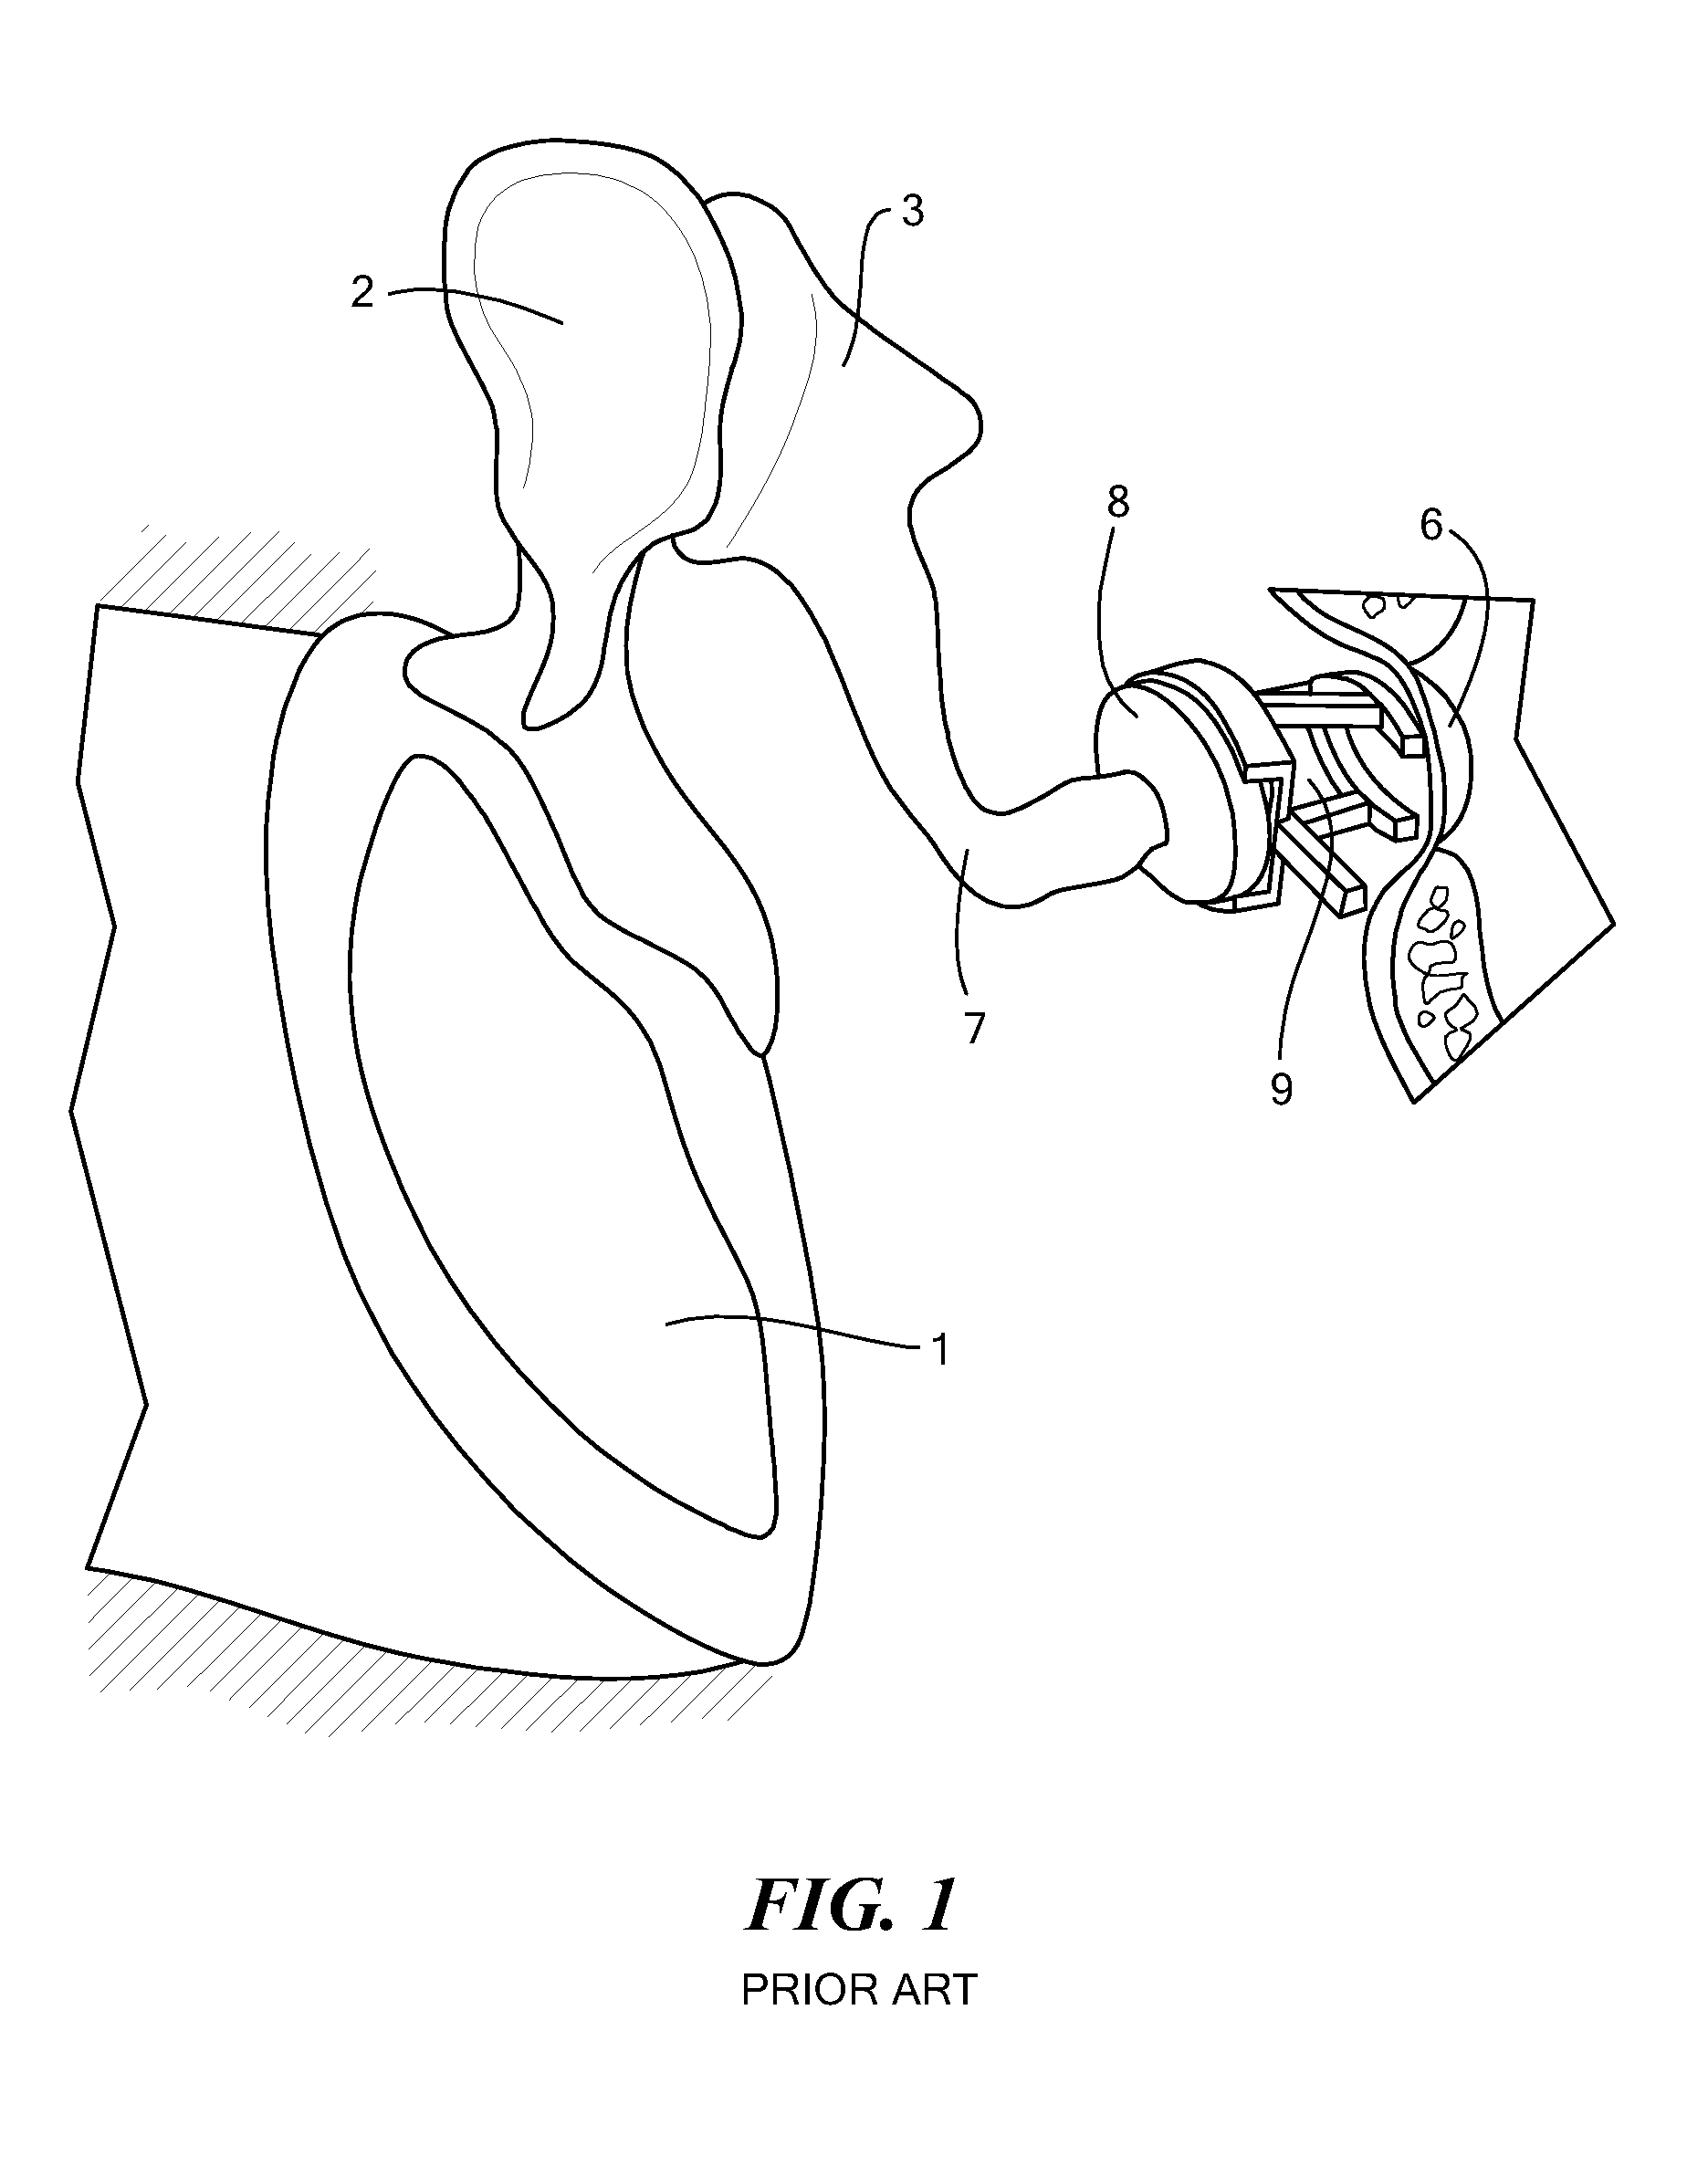 Implantable microphone for hearing systems